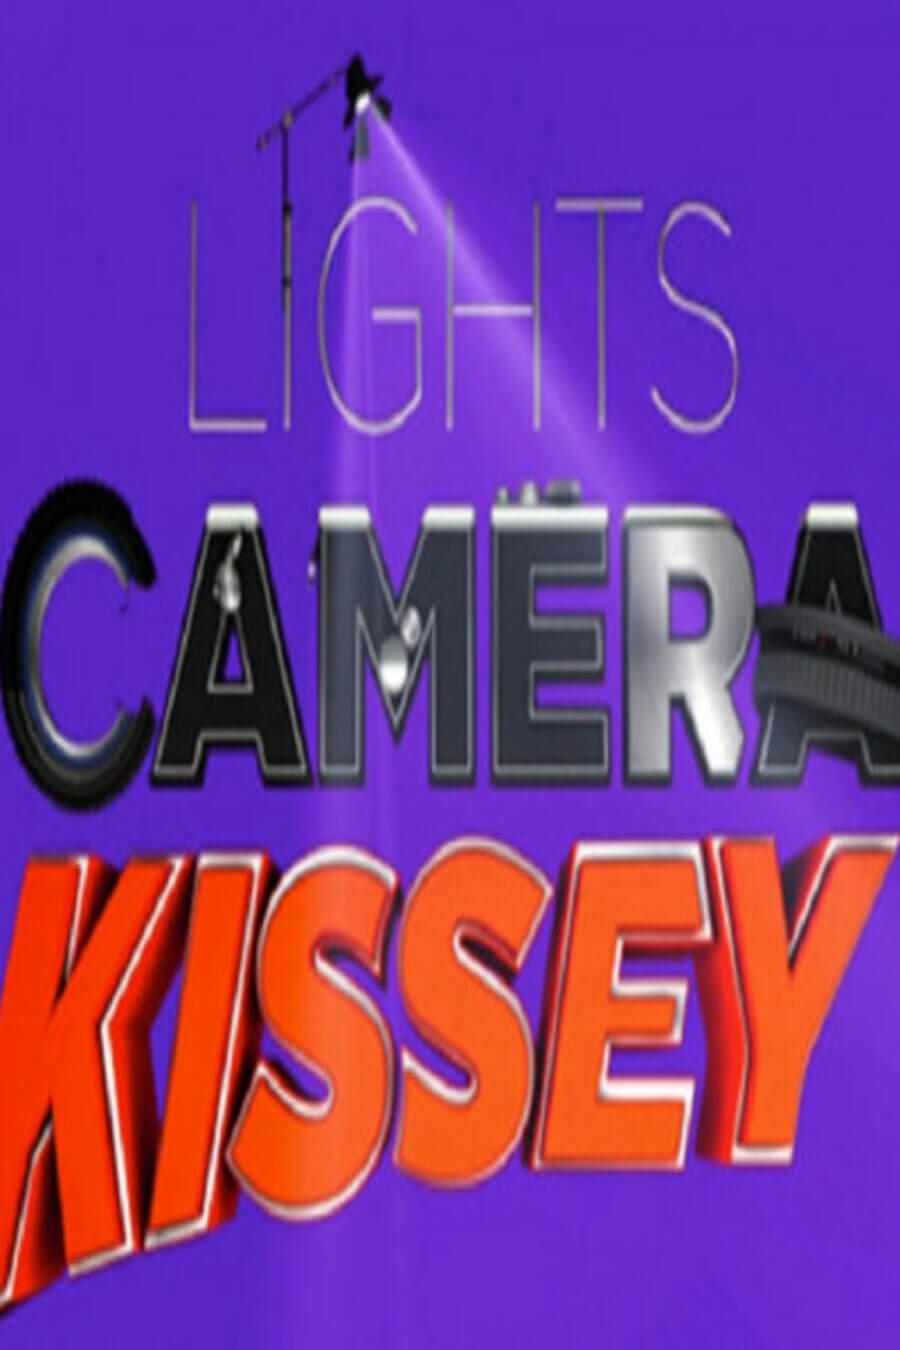 TV ratings for Lights Camera Kissey in Poland. SonyLIV TV series